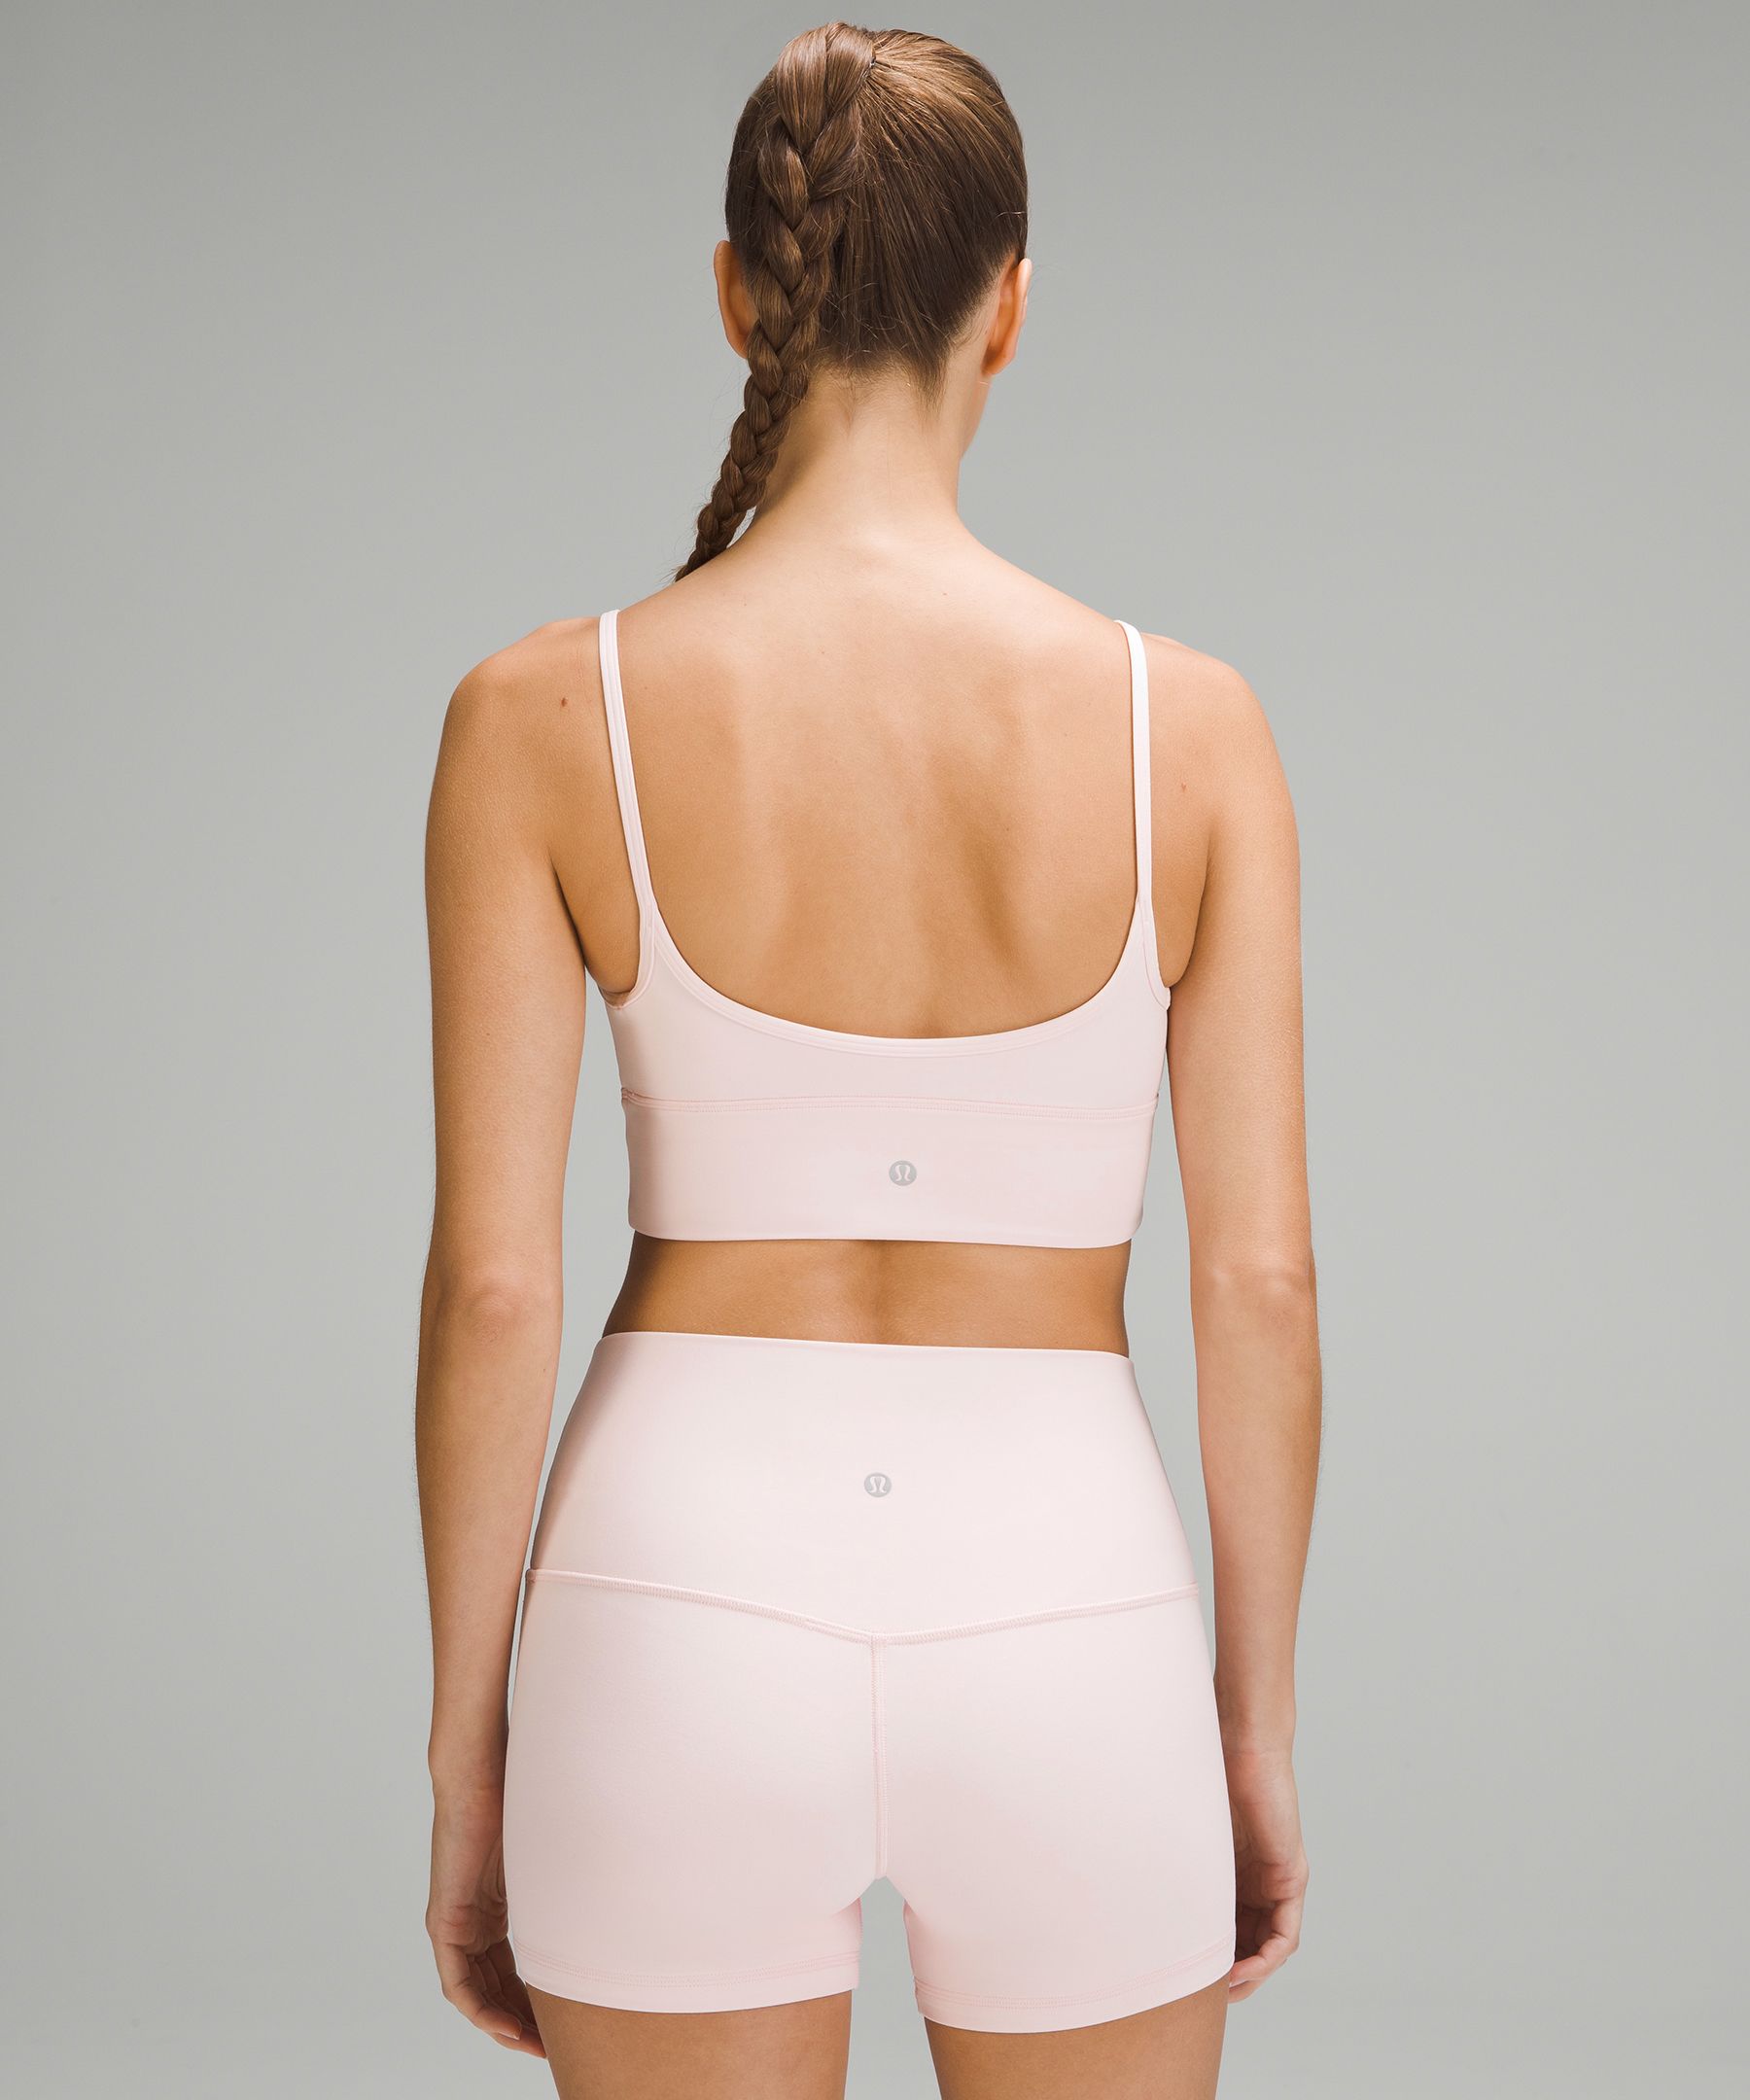 Lululemon Sports Bra Size 10 Multiple - $20 (65% Off Retail) - From Hailey